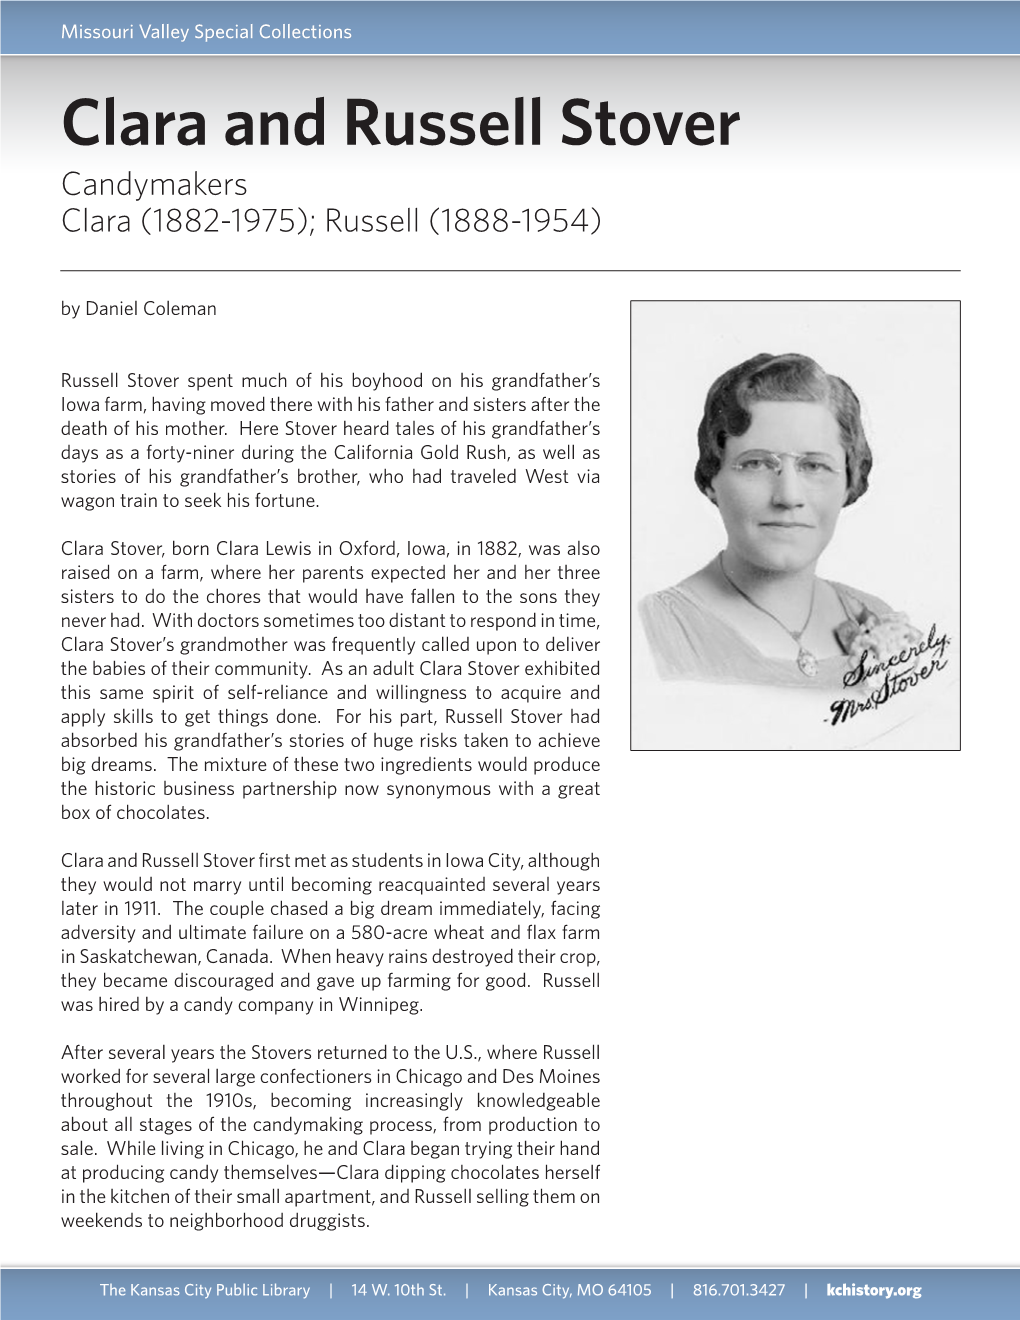 Clara and Russell Stover Candymakers Clara (1882-1975); Russell (1888-1954)